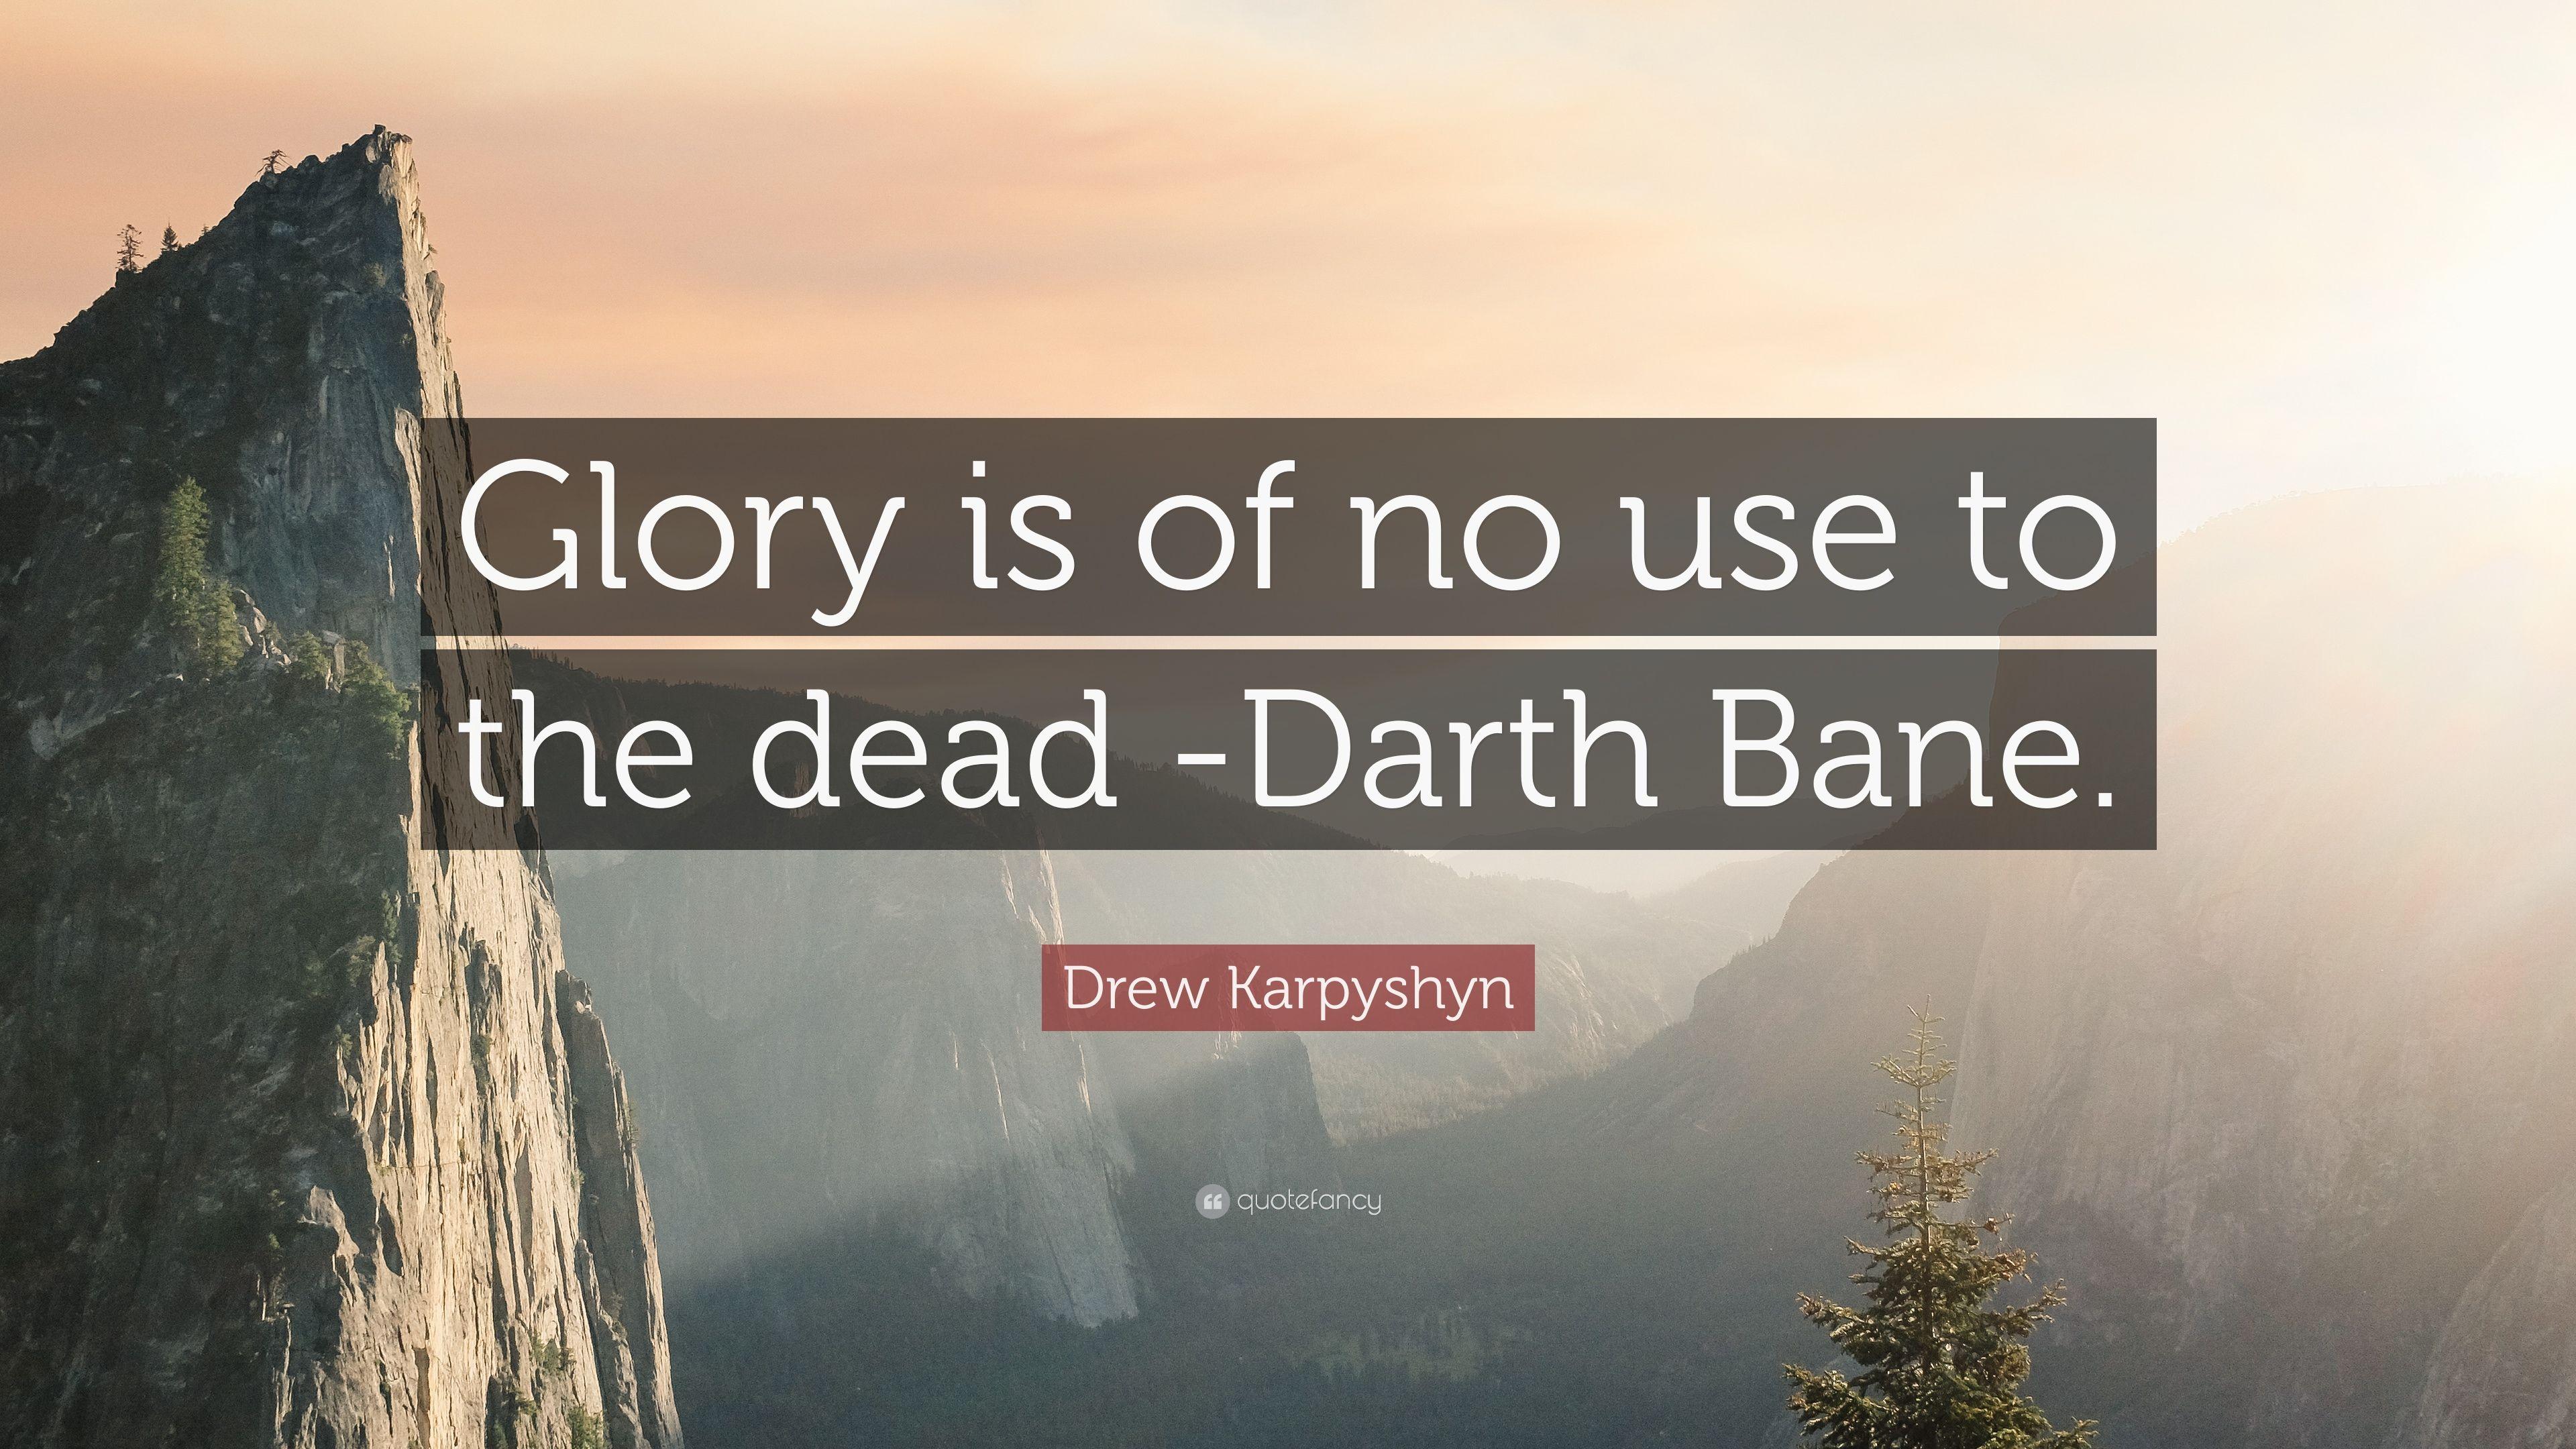 Drew Karpyshyn Quote: “Glory is of no use to the dead -Darth Bane